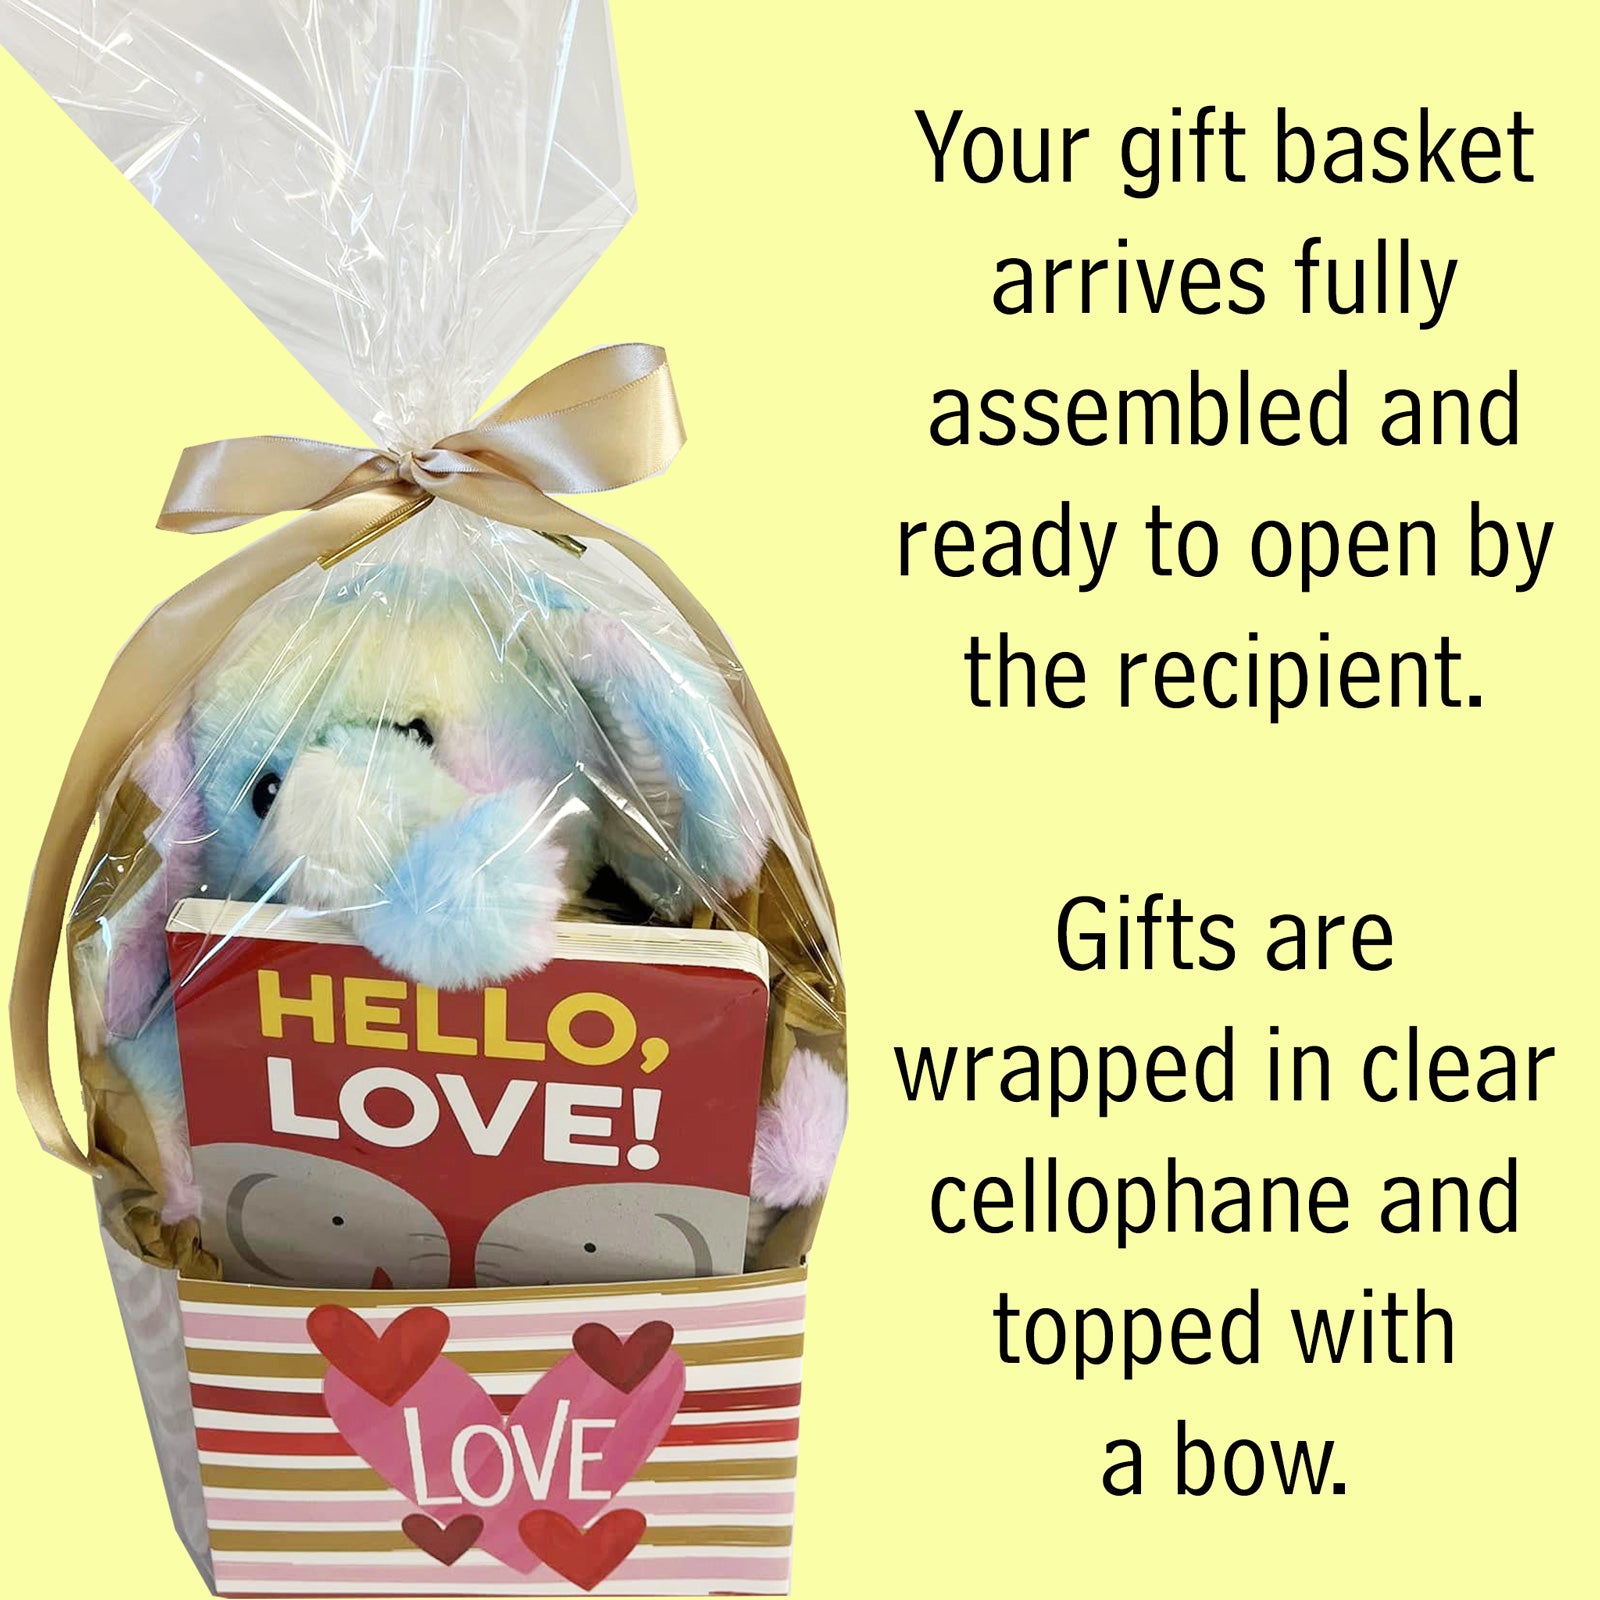 Hello Love! Baby Gift Set with Book and Plush